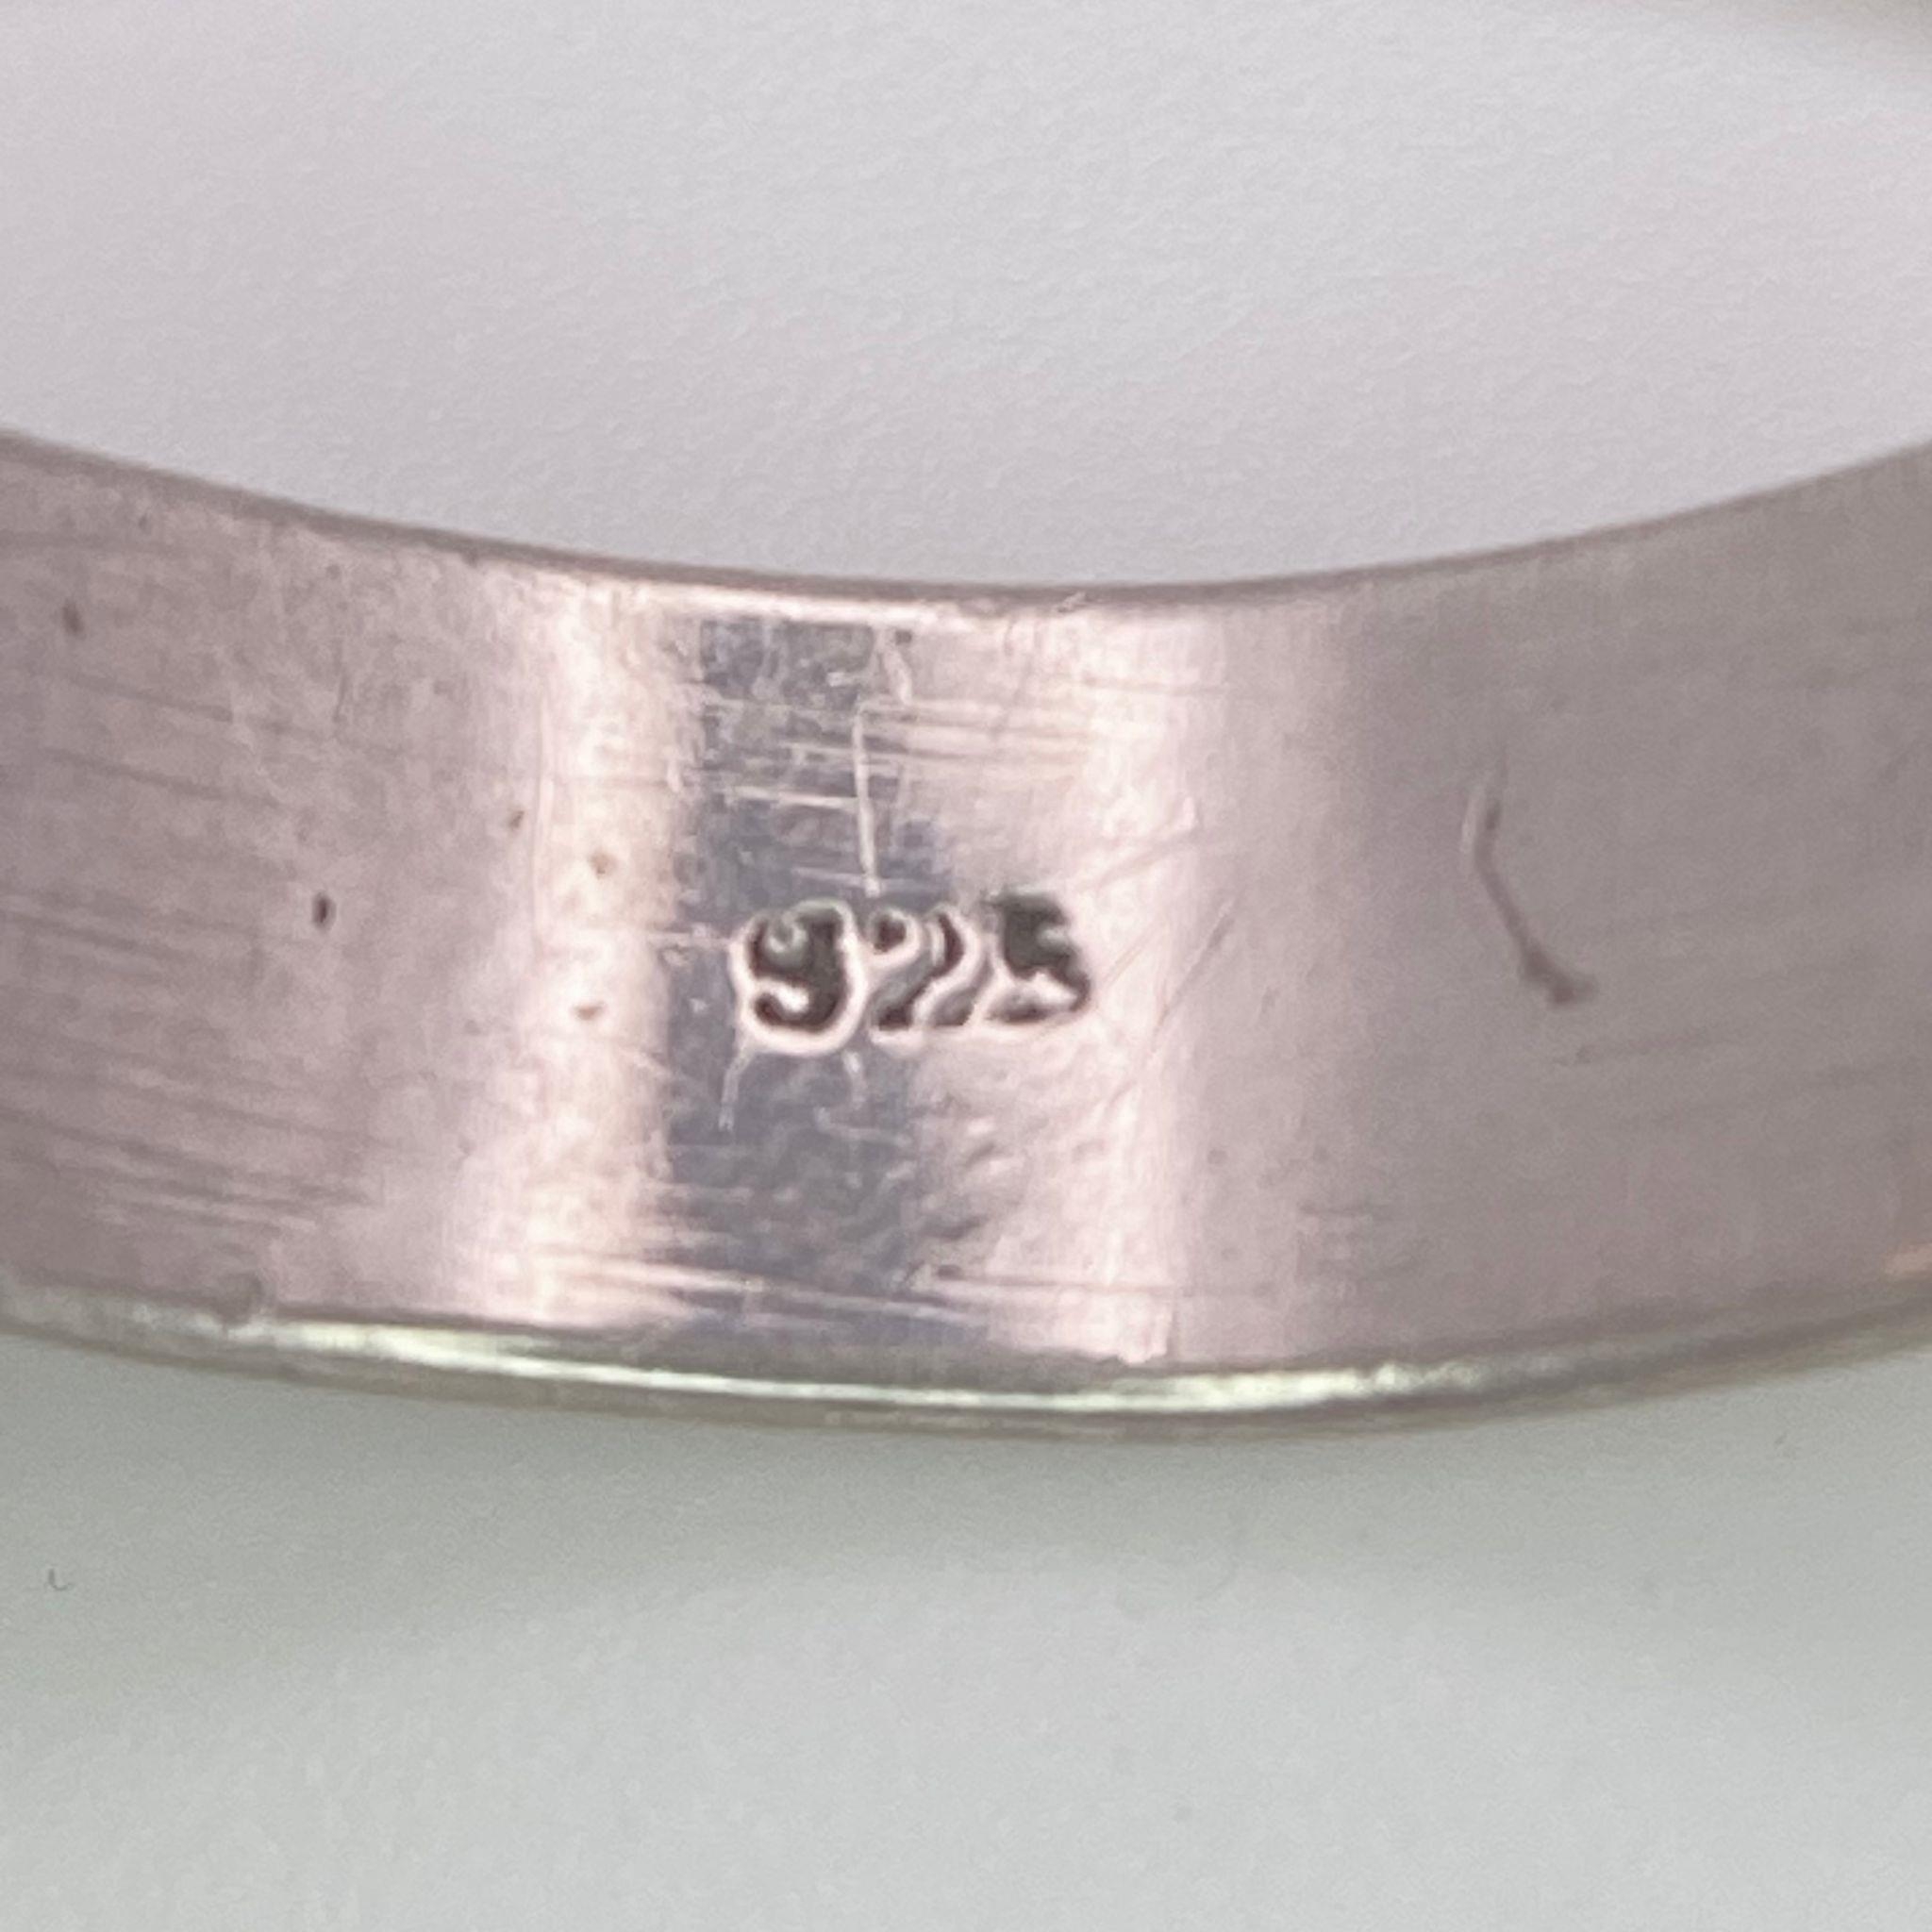 3X 925 silver band rings with different designs. Total weight 13.4G. Size U, V, R/S. - Image 8 of 13